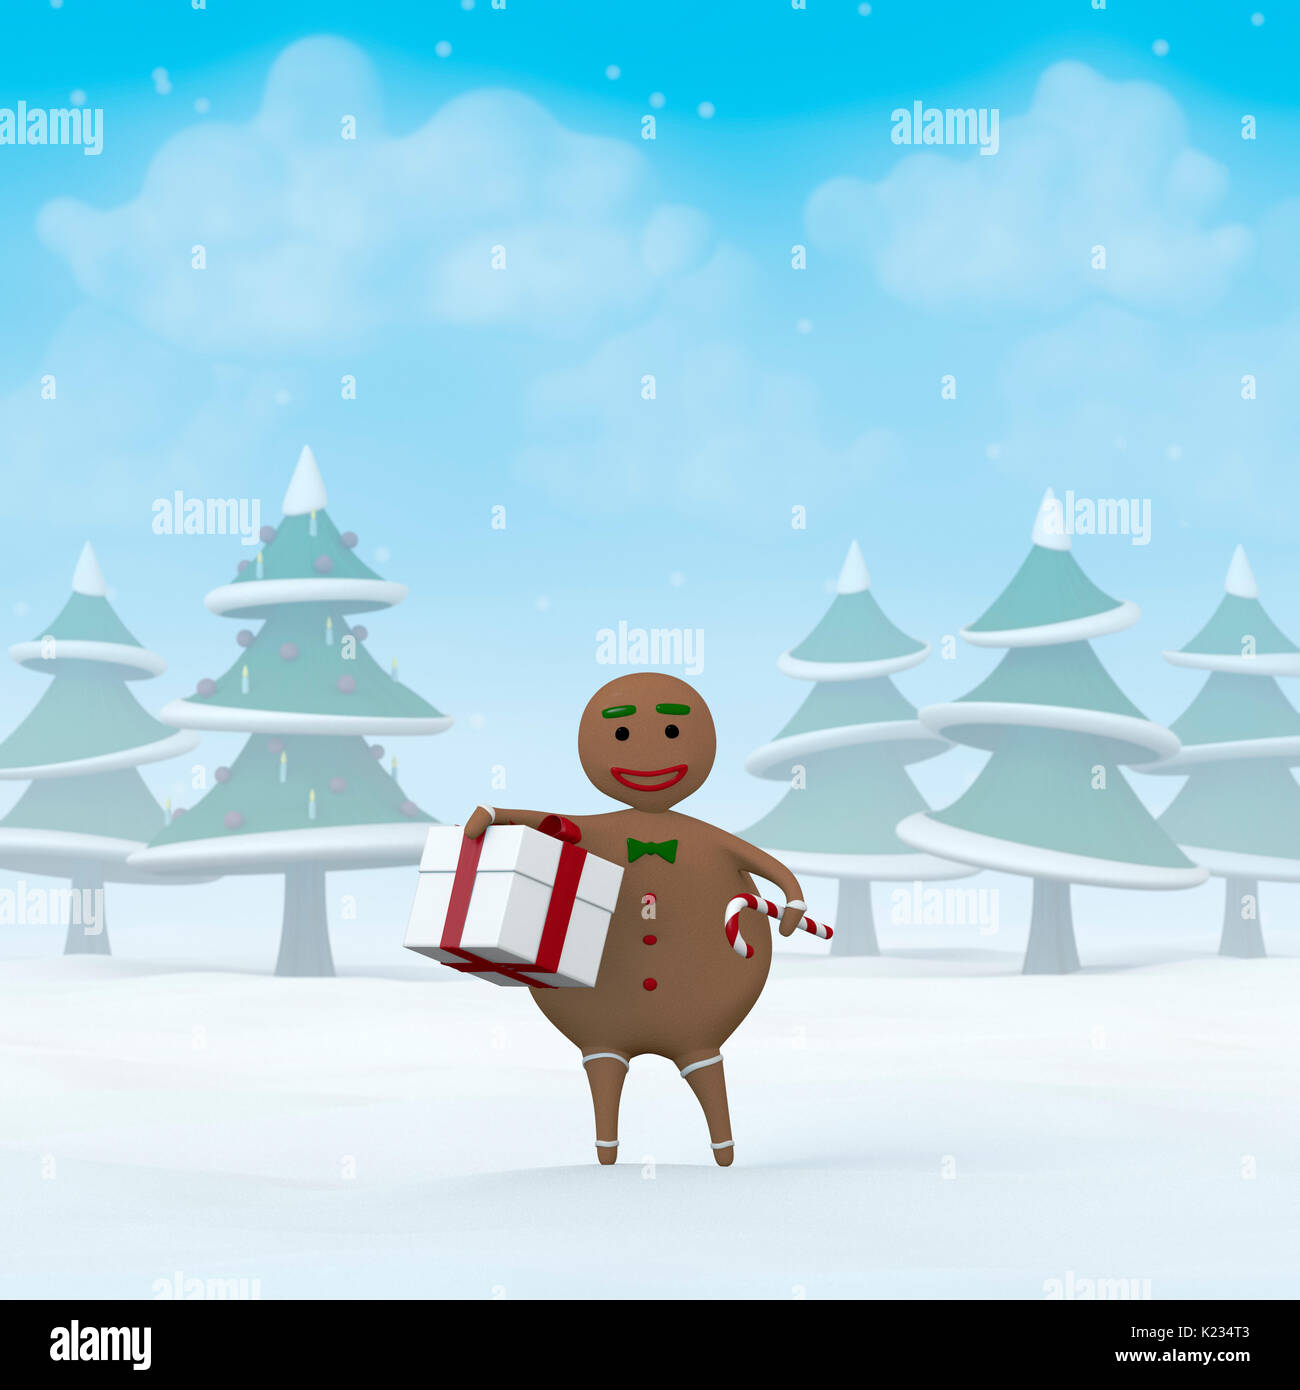 Gingerbread Man holding a Christmas Gift and a candy cane in a snowy winter landscape. Stock Photo